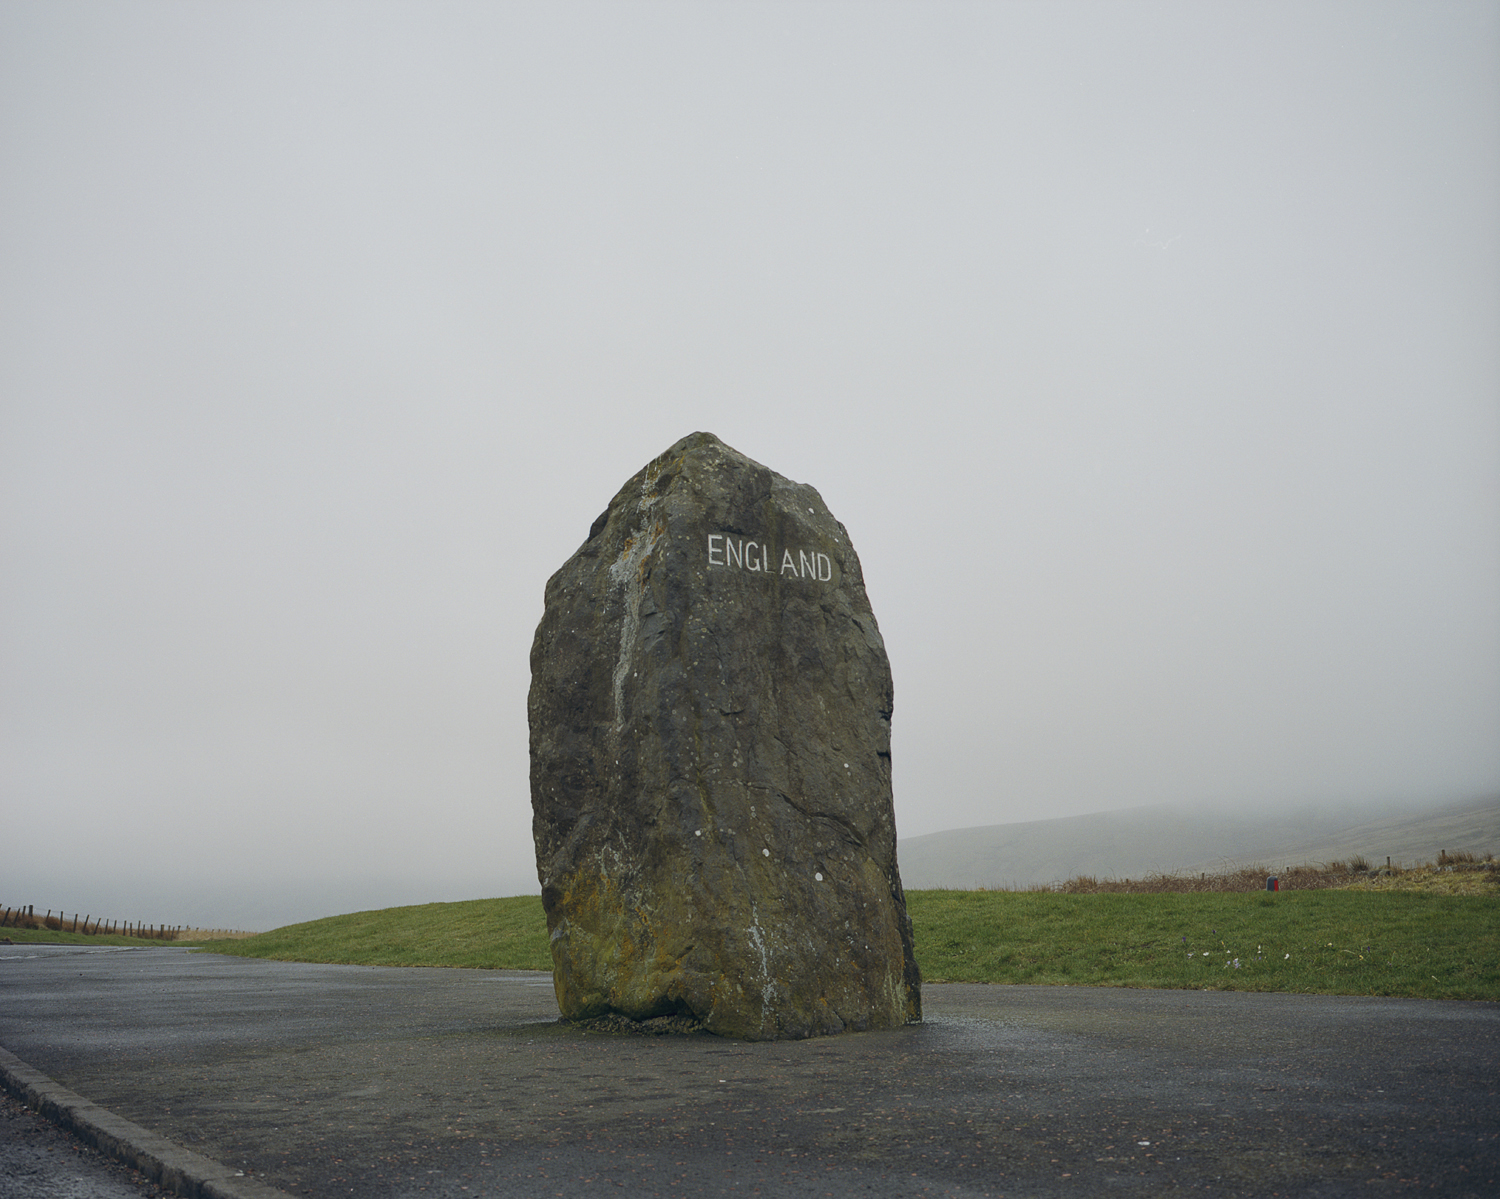 A large stone marking the English side of the border with Scotland on the A68 between Jedburgh, Scotland and Newcastle, England.